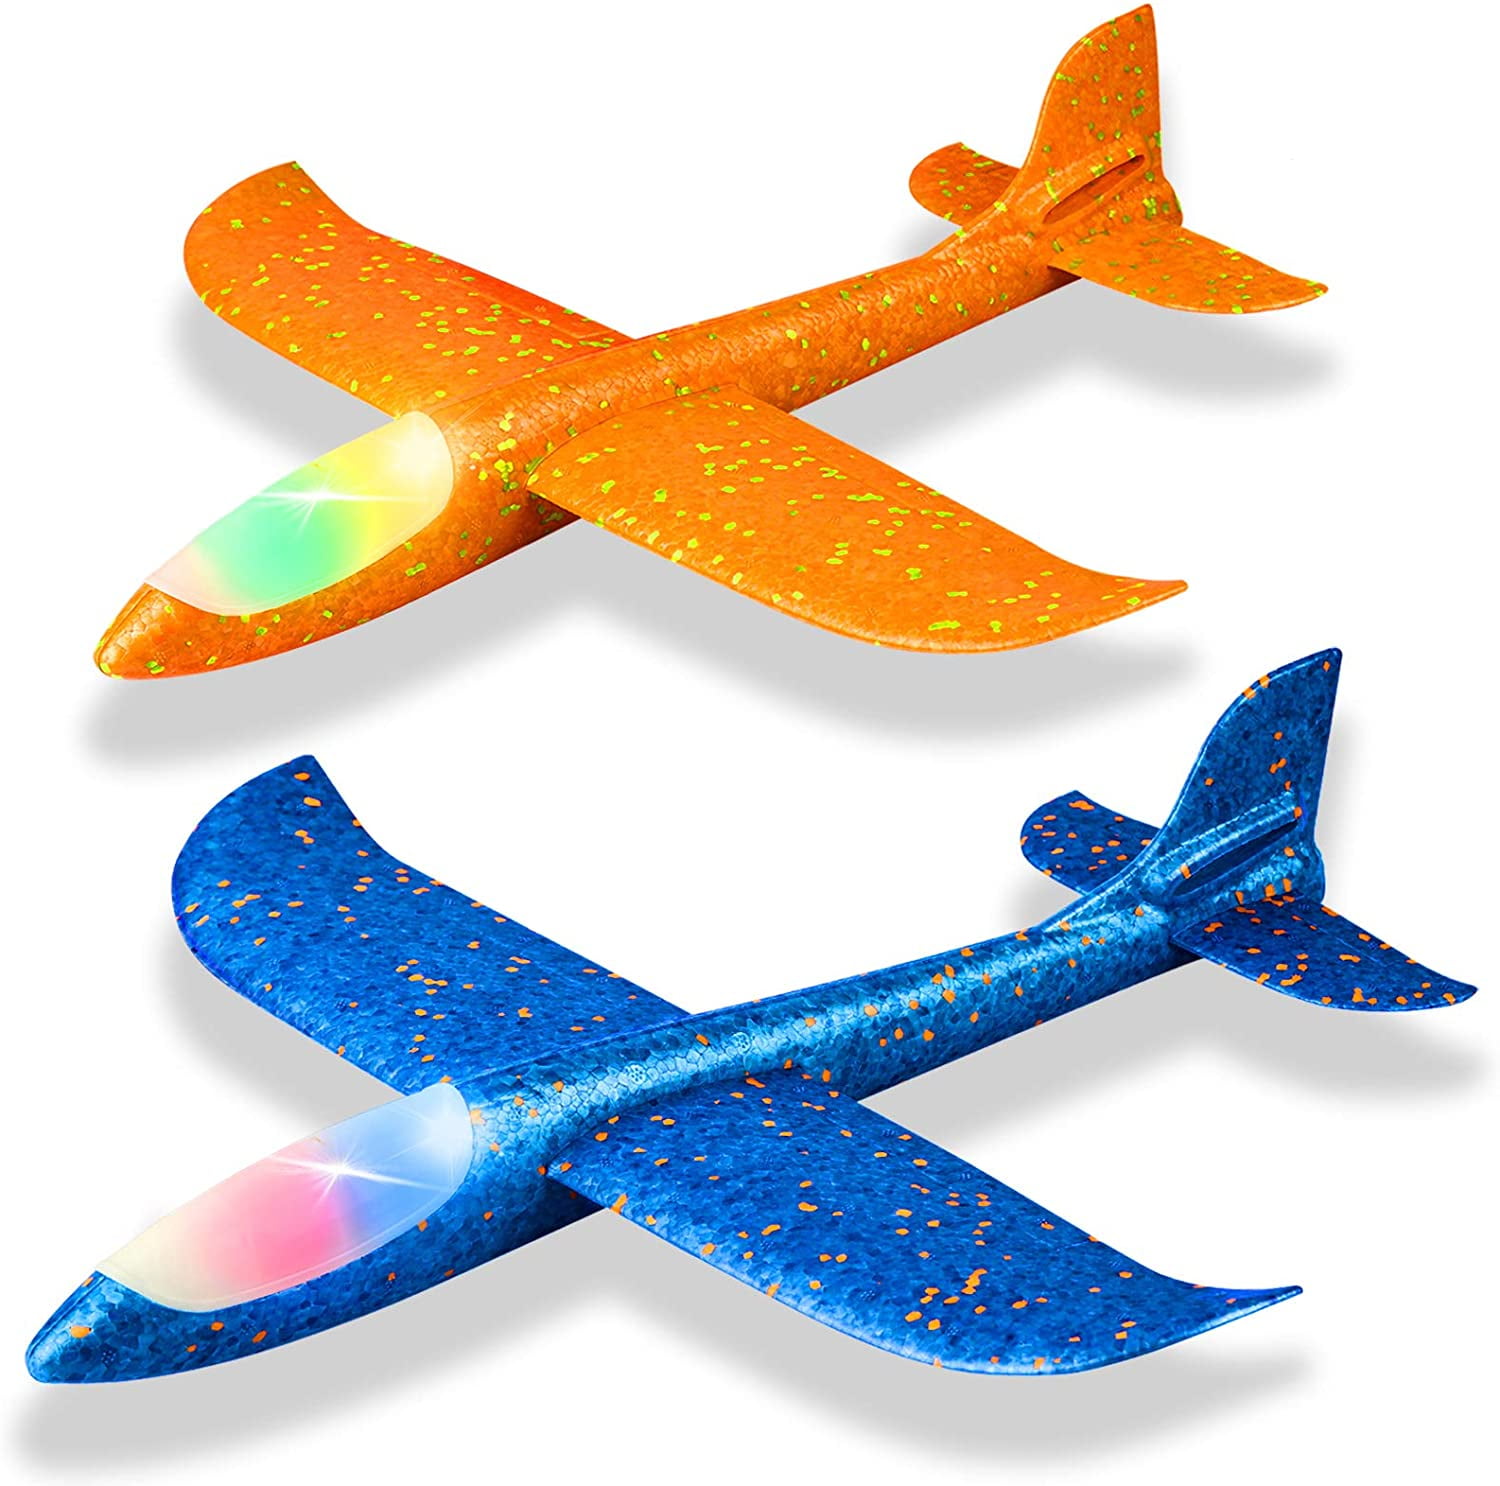 Launcher & Rubber Band Foam Flying Plane Large Throwing Toy 3 Pack Light Airplane Toy 12.4'' 